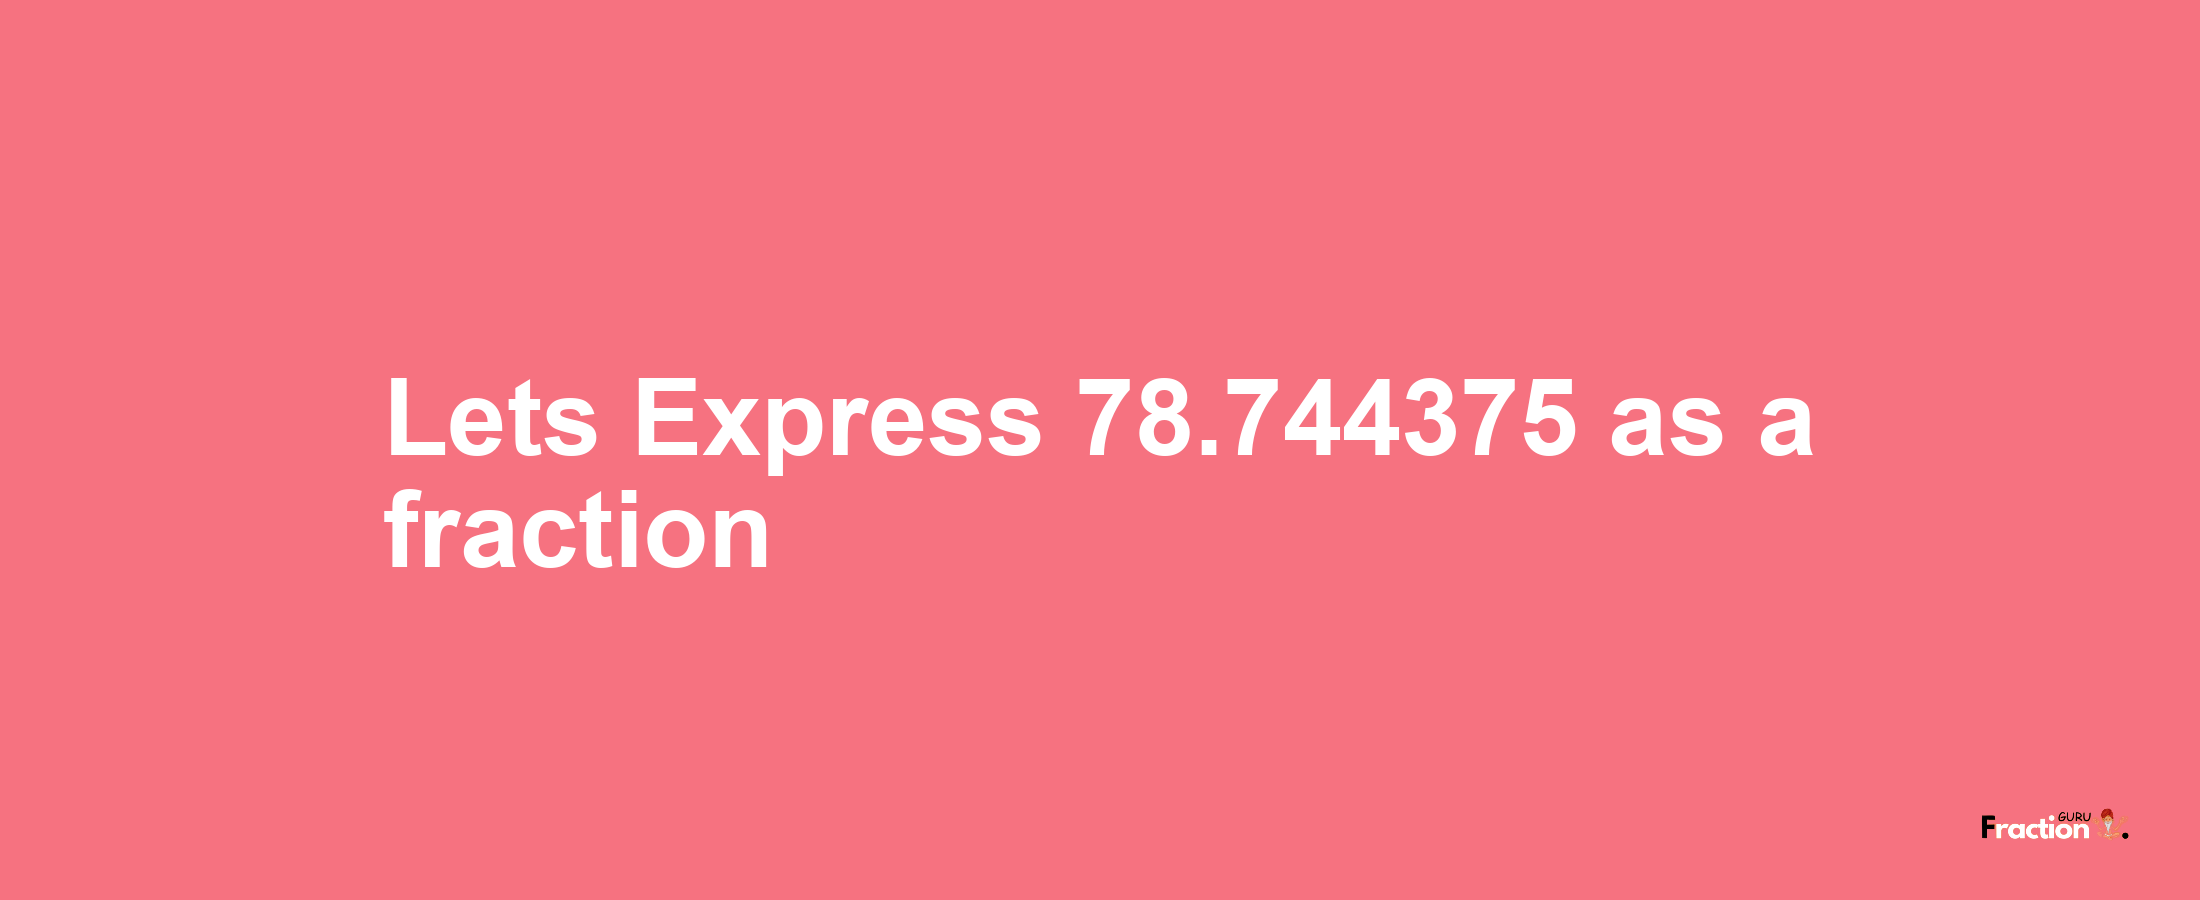 Lets Express 78.744375 as afraction